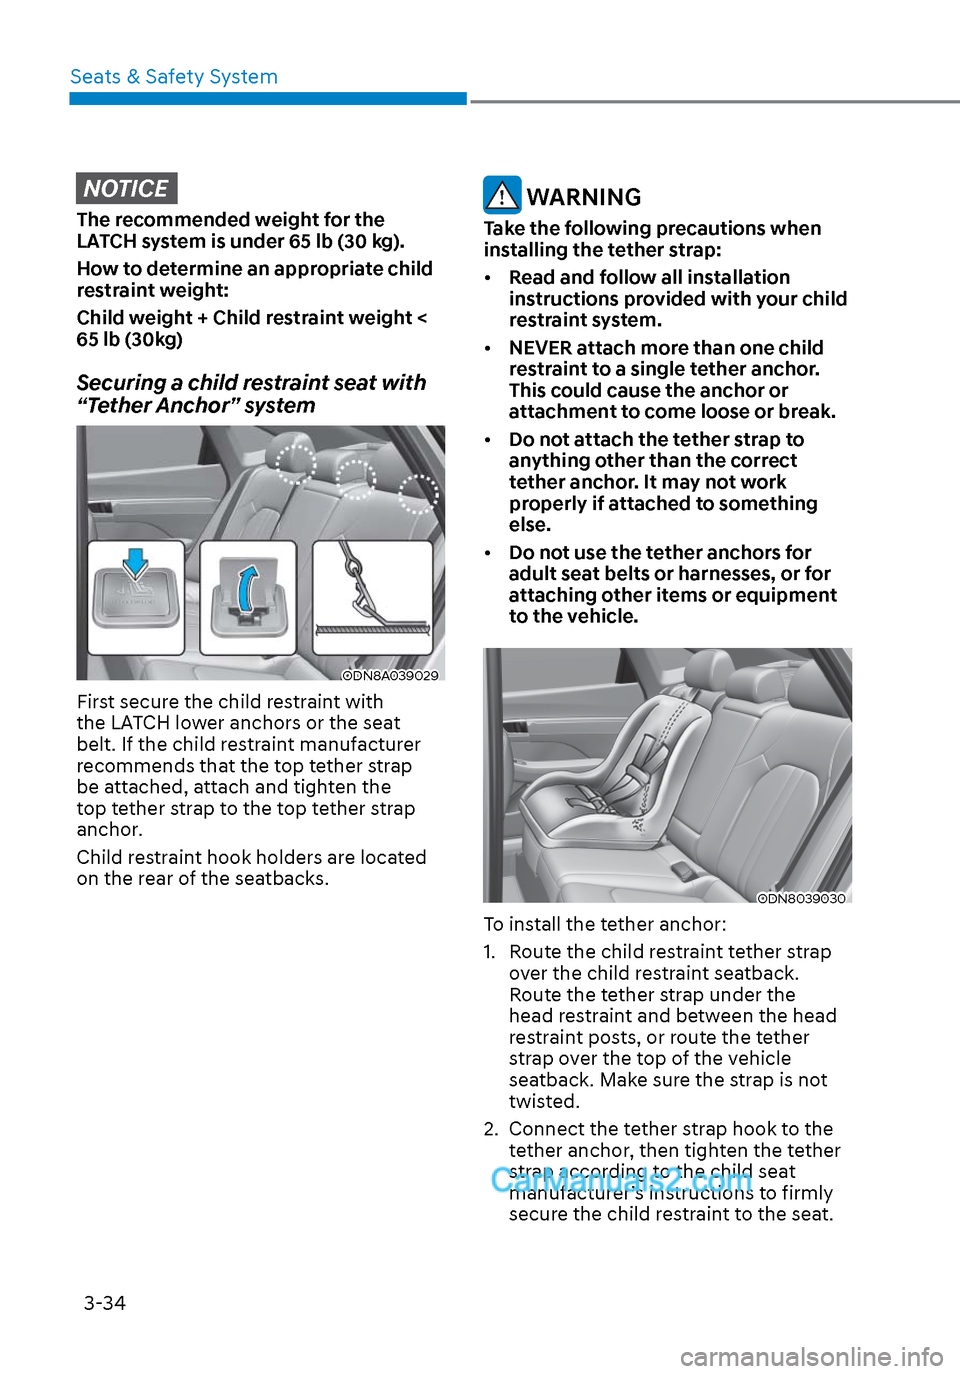 Hyundai Sonata 2020 Repair Manual Seats & Safety System3-34
NOTICE
The recommended weight for the 
LATCH system is under 65 lb (30 kg).
How to determine an appropriate child 
restraint weight:
Child weight + Child restraint weight < 
